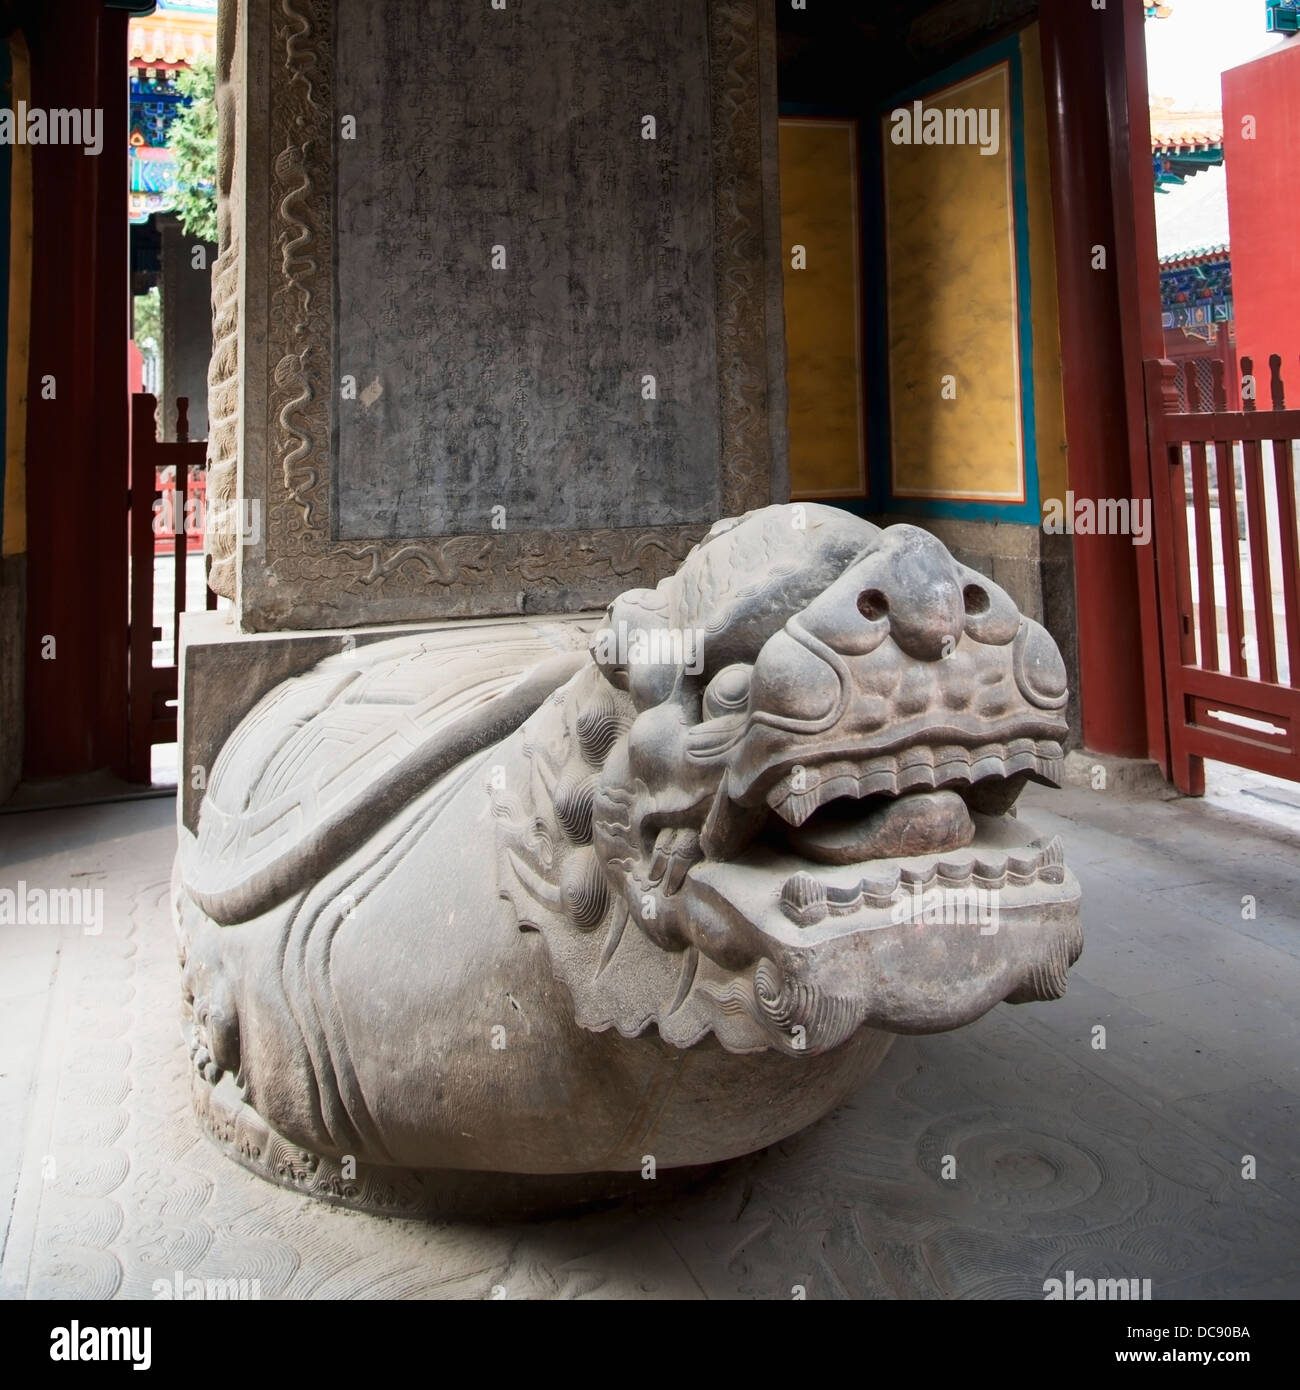 Statue of animal likeness at Confucius Temple; Beijing, China Stock Photo